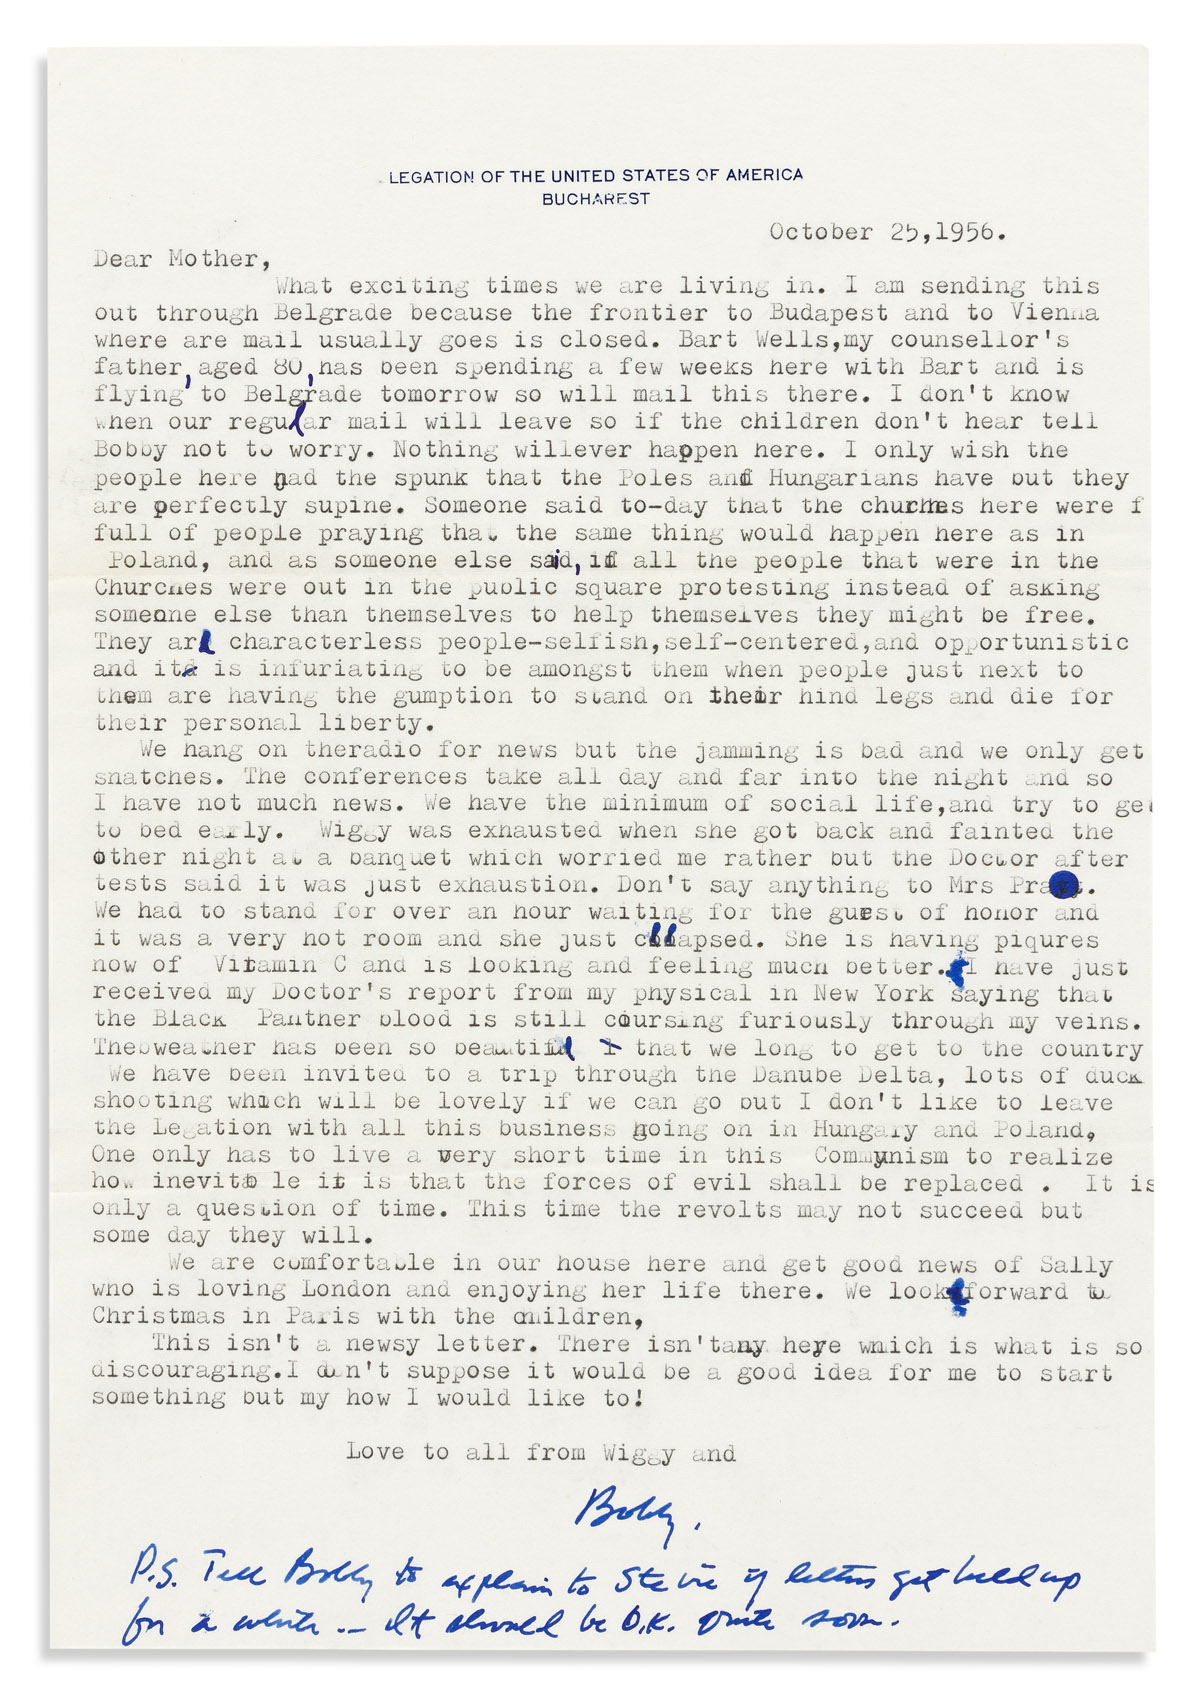 (DIPLOMACY.) Family letters of Ambassador Robert H. Thayer during the Cold War.